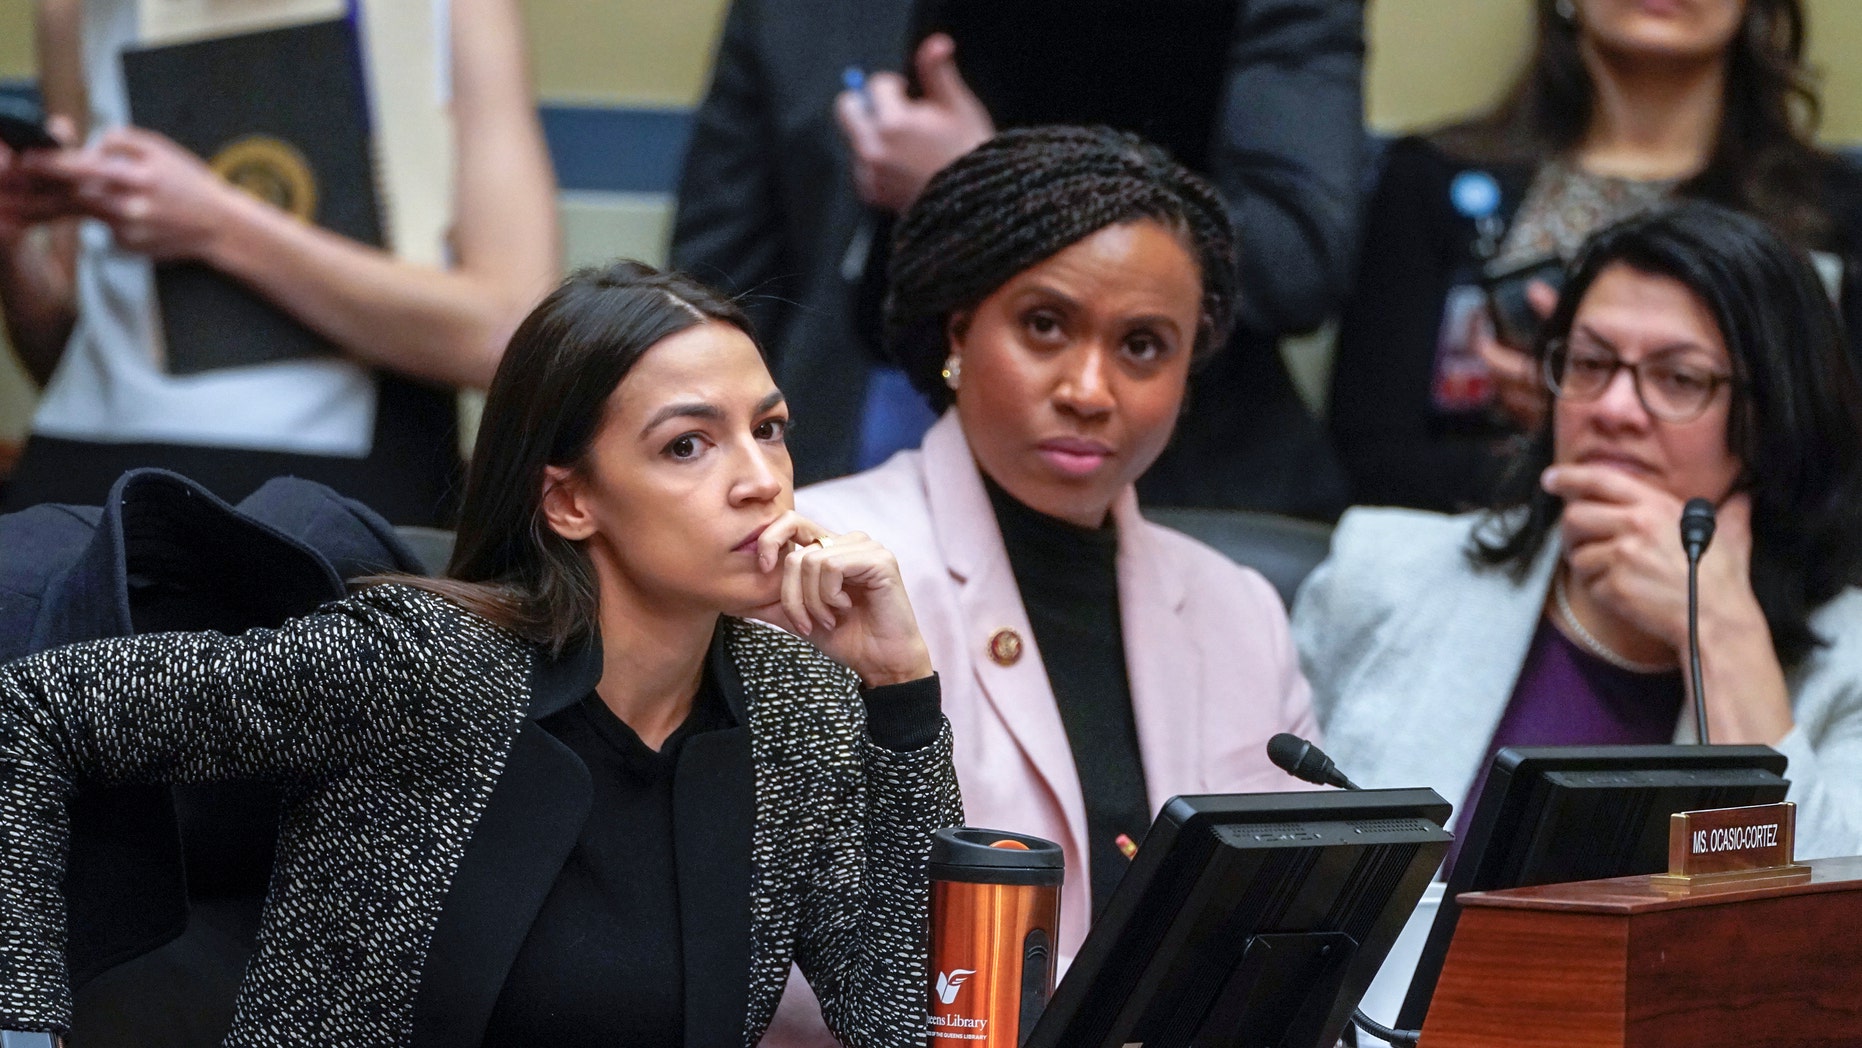 Rep. Alexandria Ocasio-Cortez, DN.Y., on the left, accompanied by Representative Ayanna Pressley, D-Mass., And Rep. Rashida Tlaib, D-Mich., Listening to a House Monitoring and Reform Committee meeting, Capitol Hill, Washington, DC, Tuesday, February 26, 2019. (AP Photo / J. Scott Applewhite)